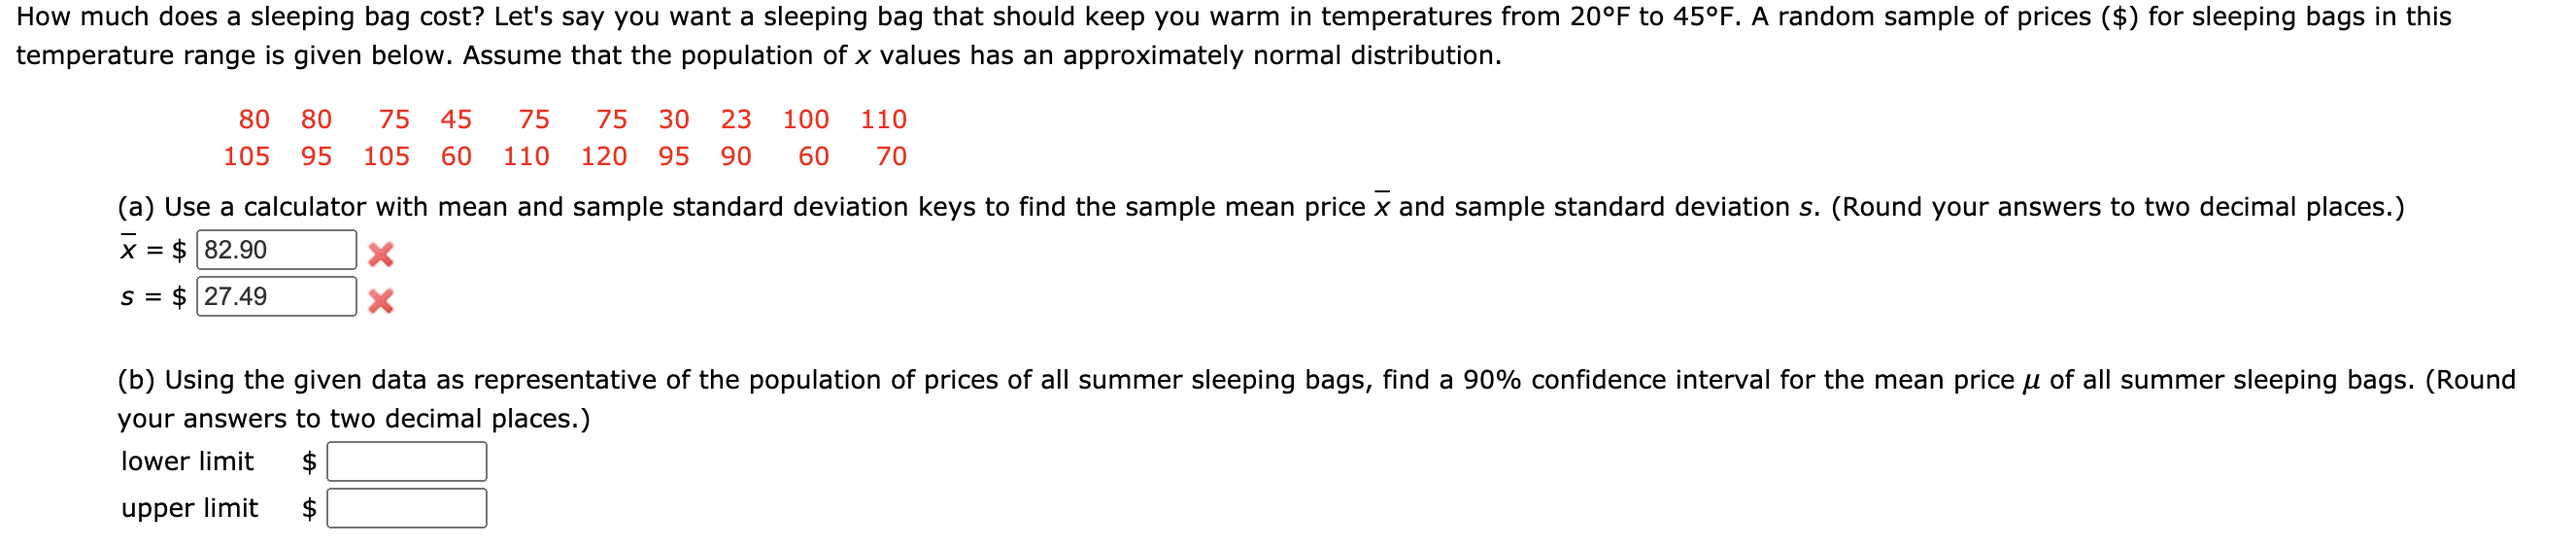 How much does a sleeping bag cost? Let's say you want a sleeping bag that should keep you warm in temperatures from 20°F to 45°F. A random sample of prices ($) for sleeping bags in this
temperature range is given below. Assume that the population of x values has an approximately normal distribution.
80
80
75
45
75
75
30
23
100
110
105
95
105
60
110
120
95
90
60
70
(a) Use a calculator with mean and sample standard deviation keys to find the sample mean price x and sample standard deviation s. (Round your answers to two decimal places.)
X =
$ 82.90
S =
$ 27.49
(b) Using the given data as representative of the population of prices of all summer sleeping bags, find a 90% confidence interval for the mean price u of all summer sleeping bags. (Round
your answers to two decimal places.)
lower limit
$
upper limit
$
